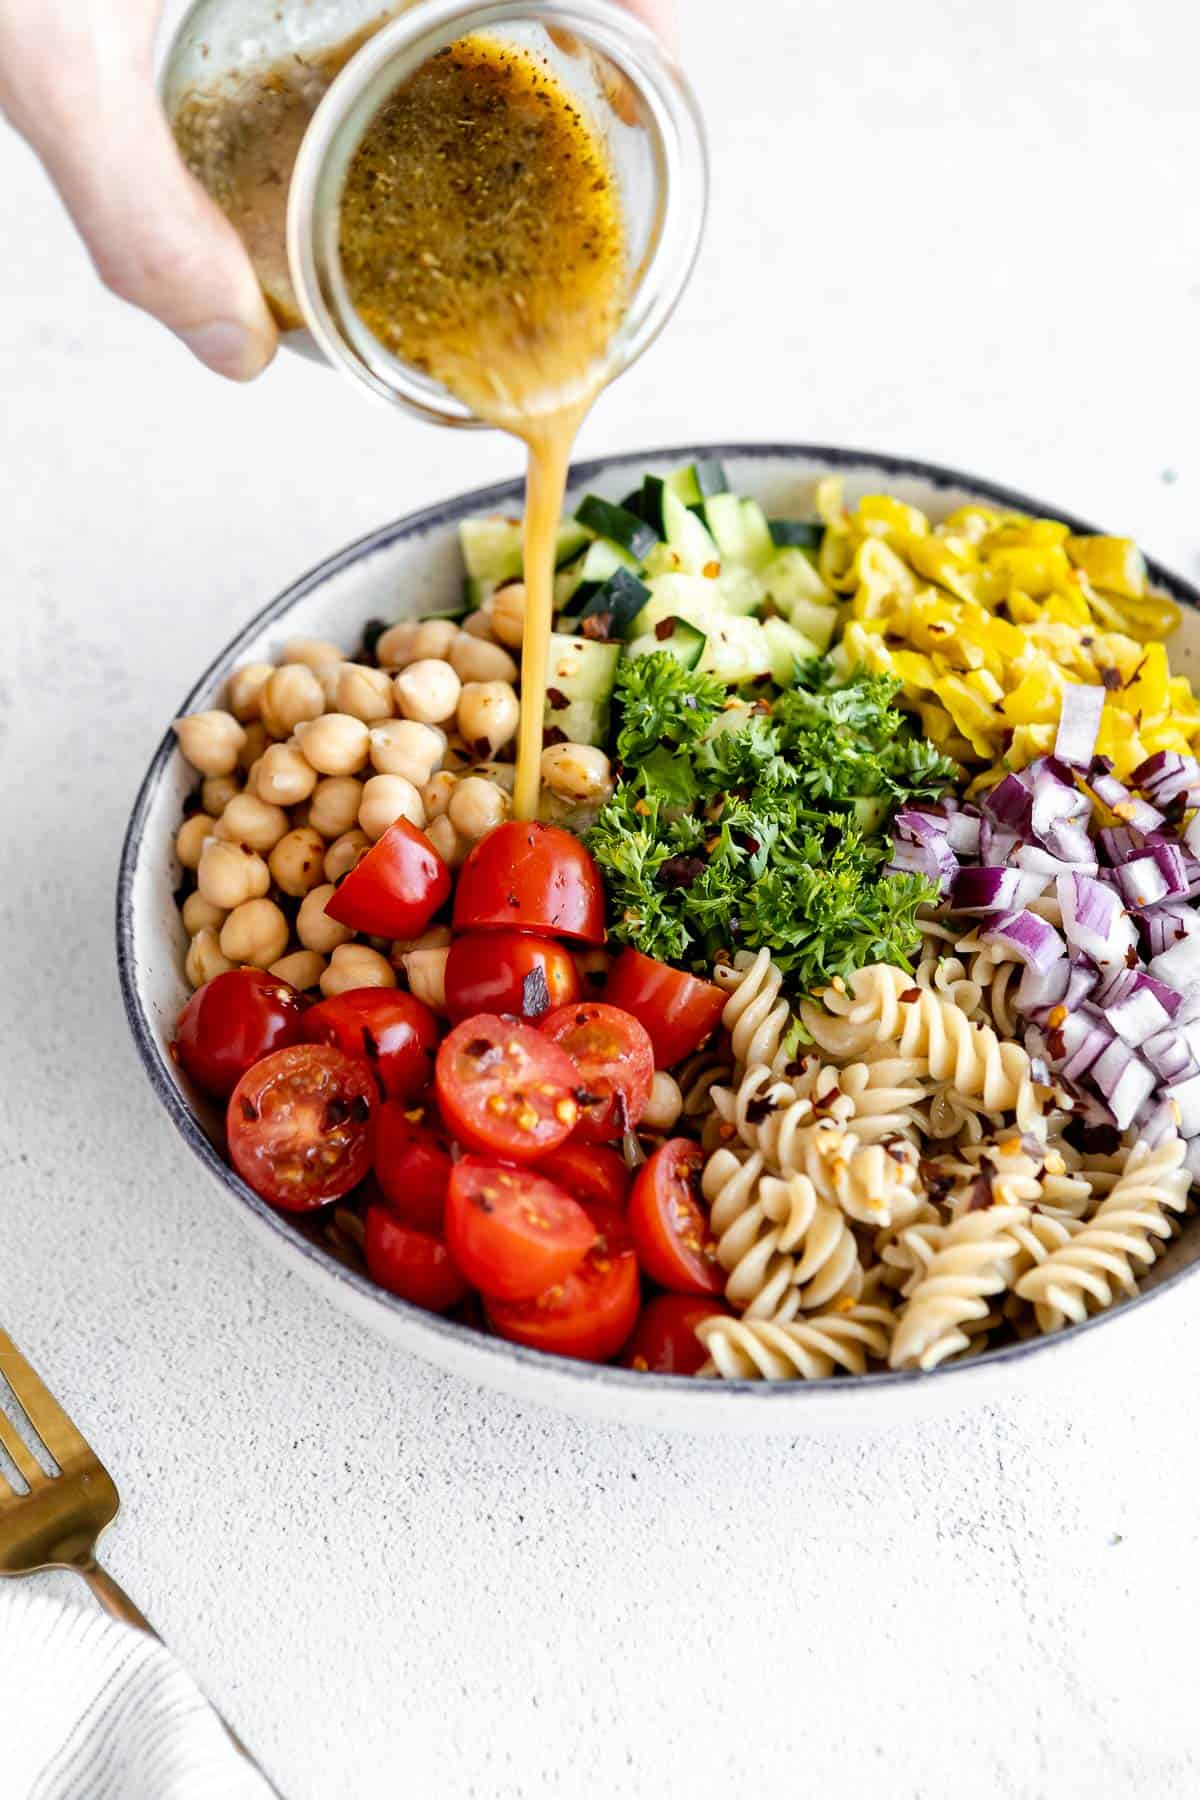 pouring the dressing on top of the vegan chickpea pasta salad